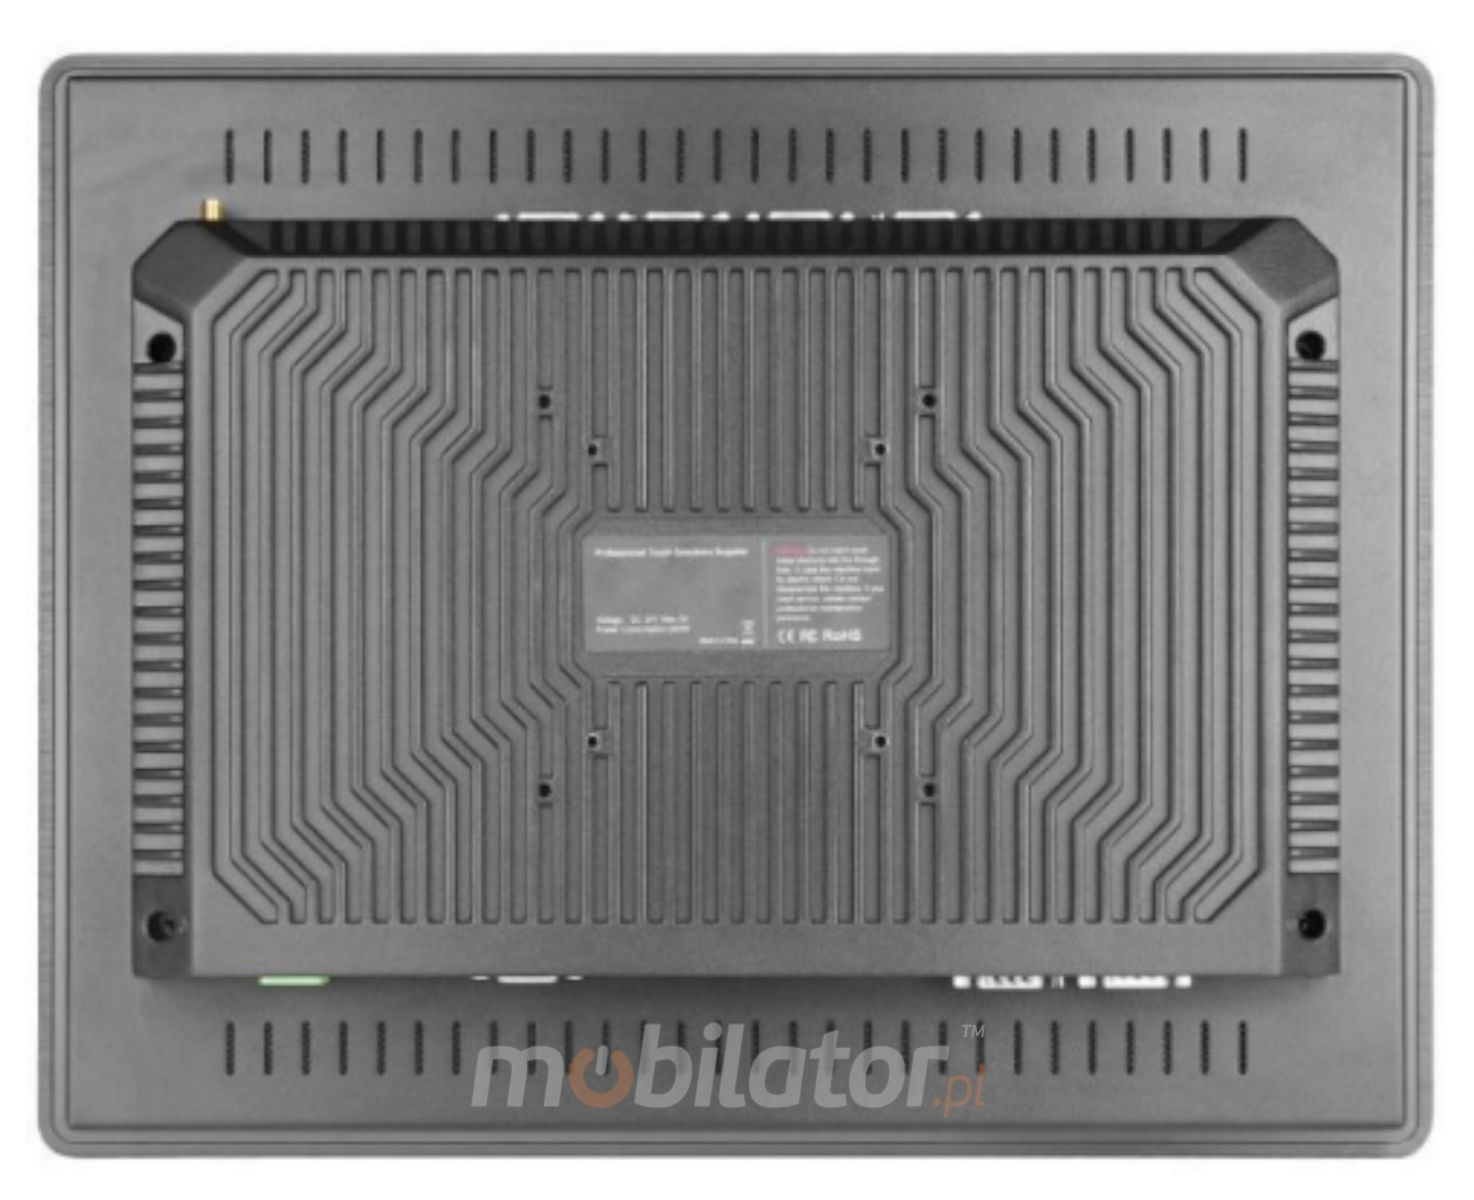 View of the back of the industrial and high-performance panel BIBOX-150PC2